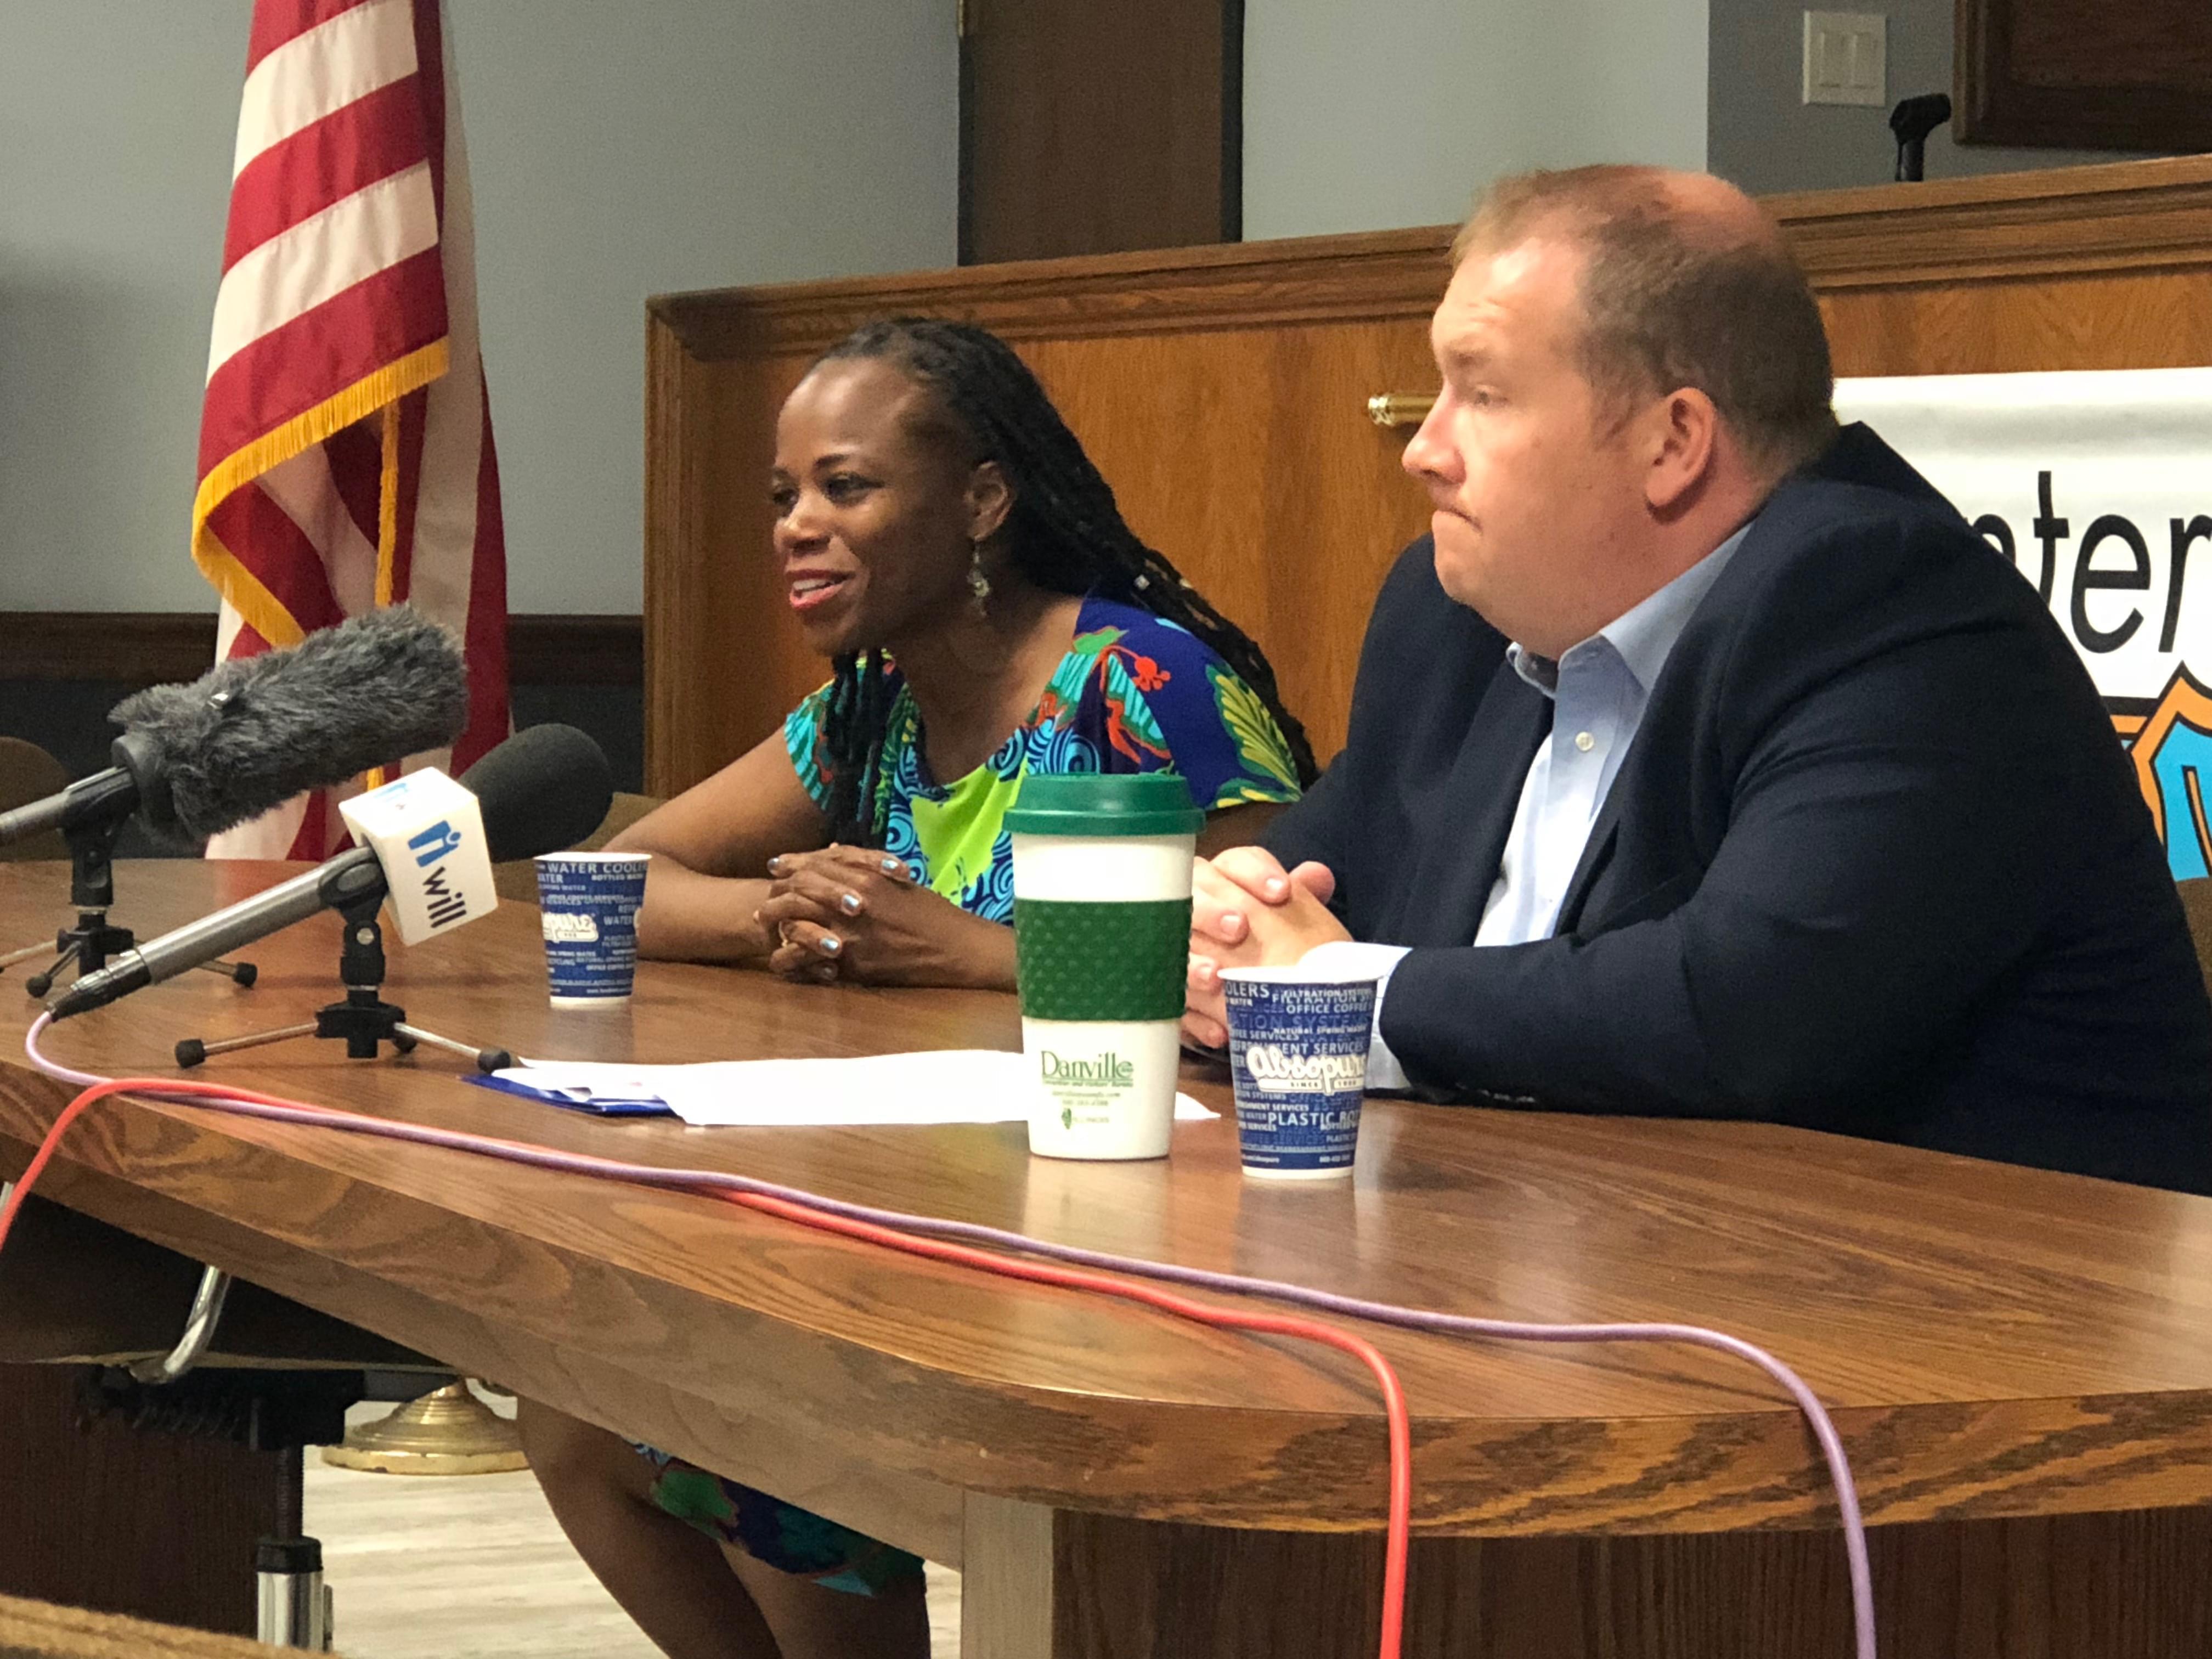 State Senator Scott Bennett and State Representative Carol Ammons spoke at a town hall in Champaign on Wednesday evening. 